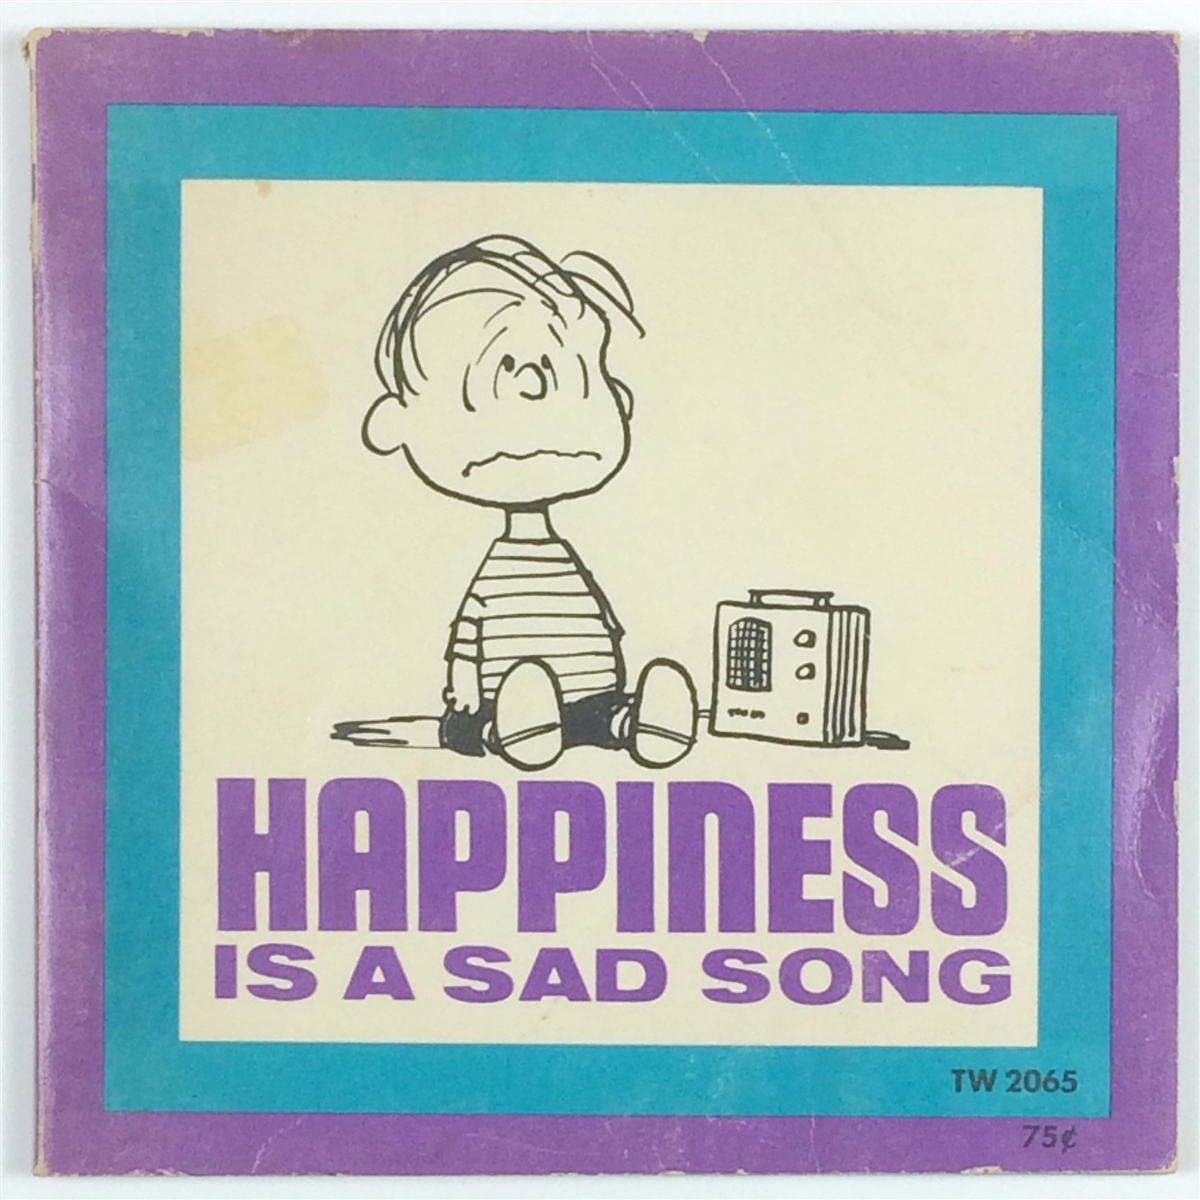 Be happy you be sad. Charlie Brown about Vinyl. Comic book Happy and Sad.